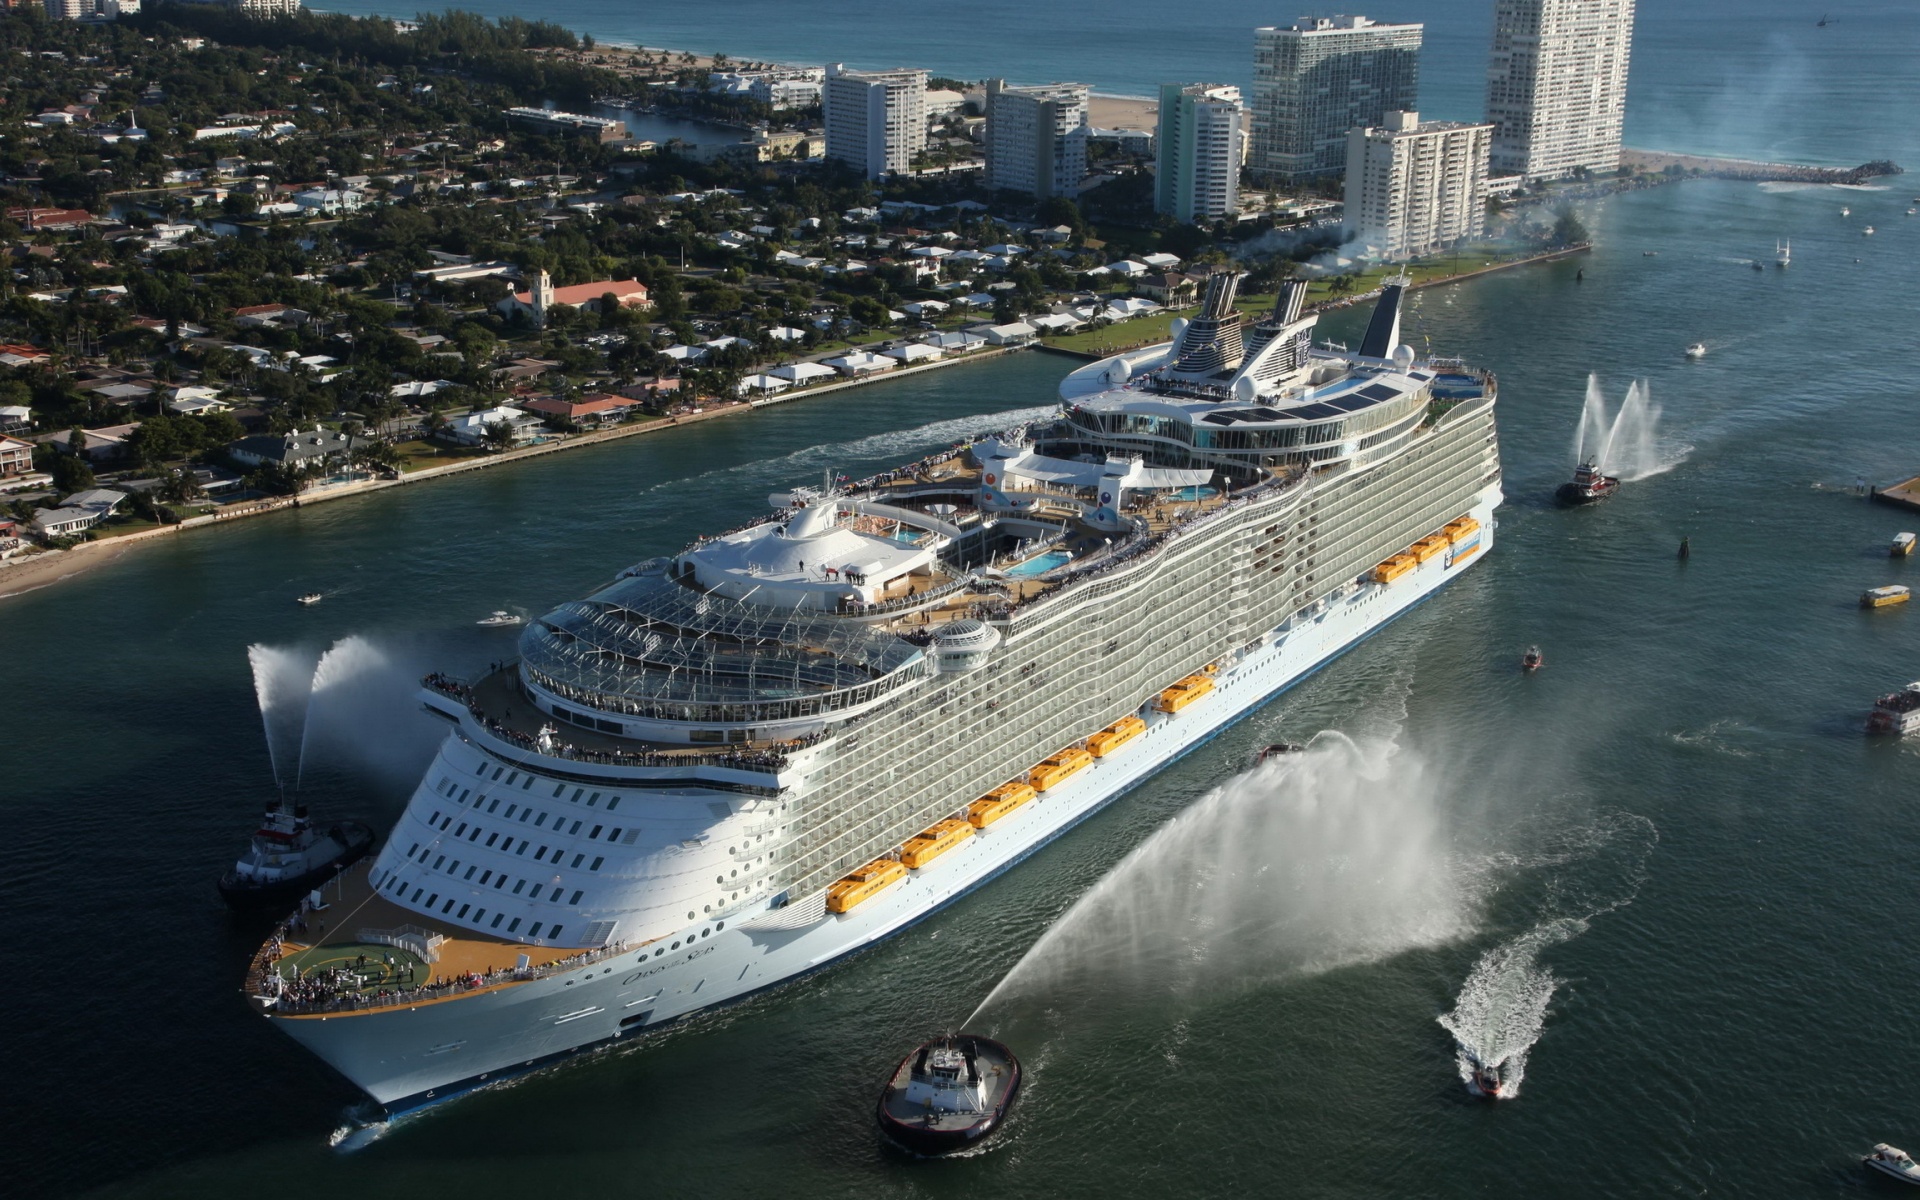  September 18 2015 By admin Comments Off on Cruise Ship Wallpapers HD